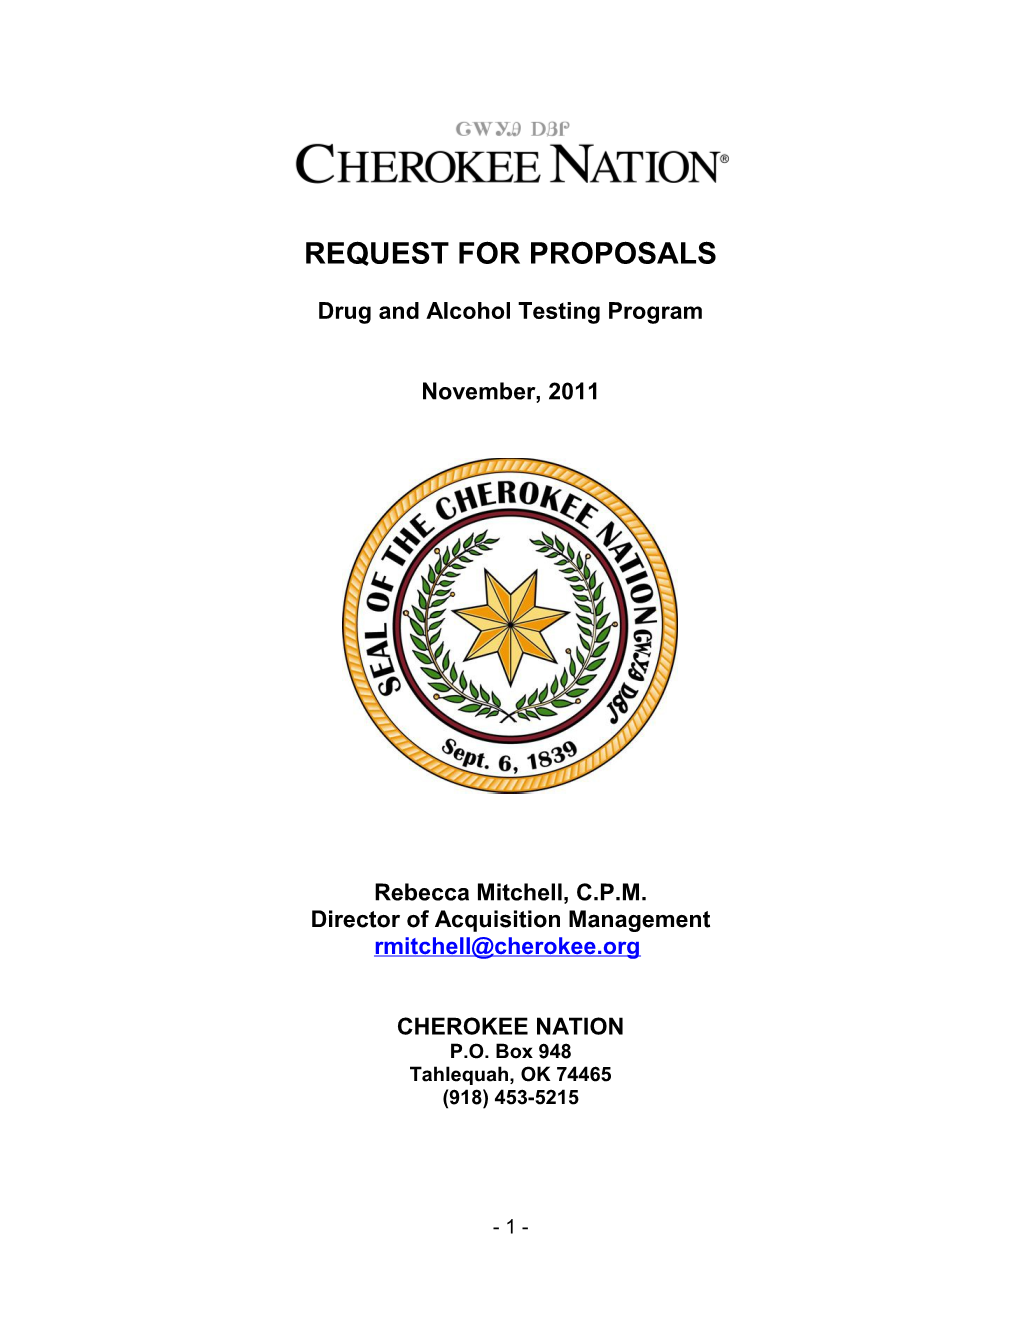 The Cherokee Nation Plans to Select As Many As Three Proposals for the Partial Or Complete